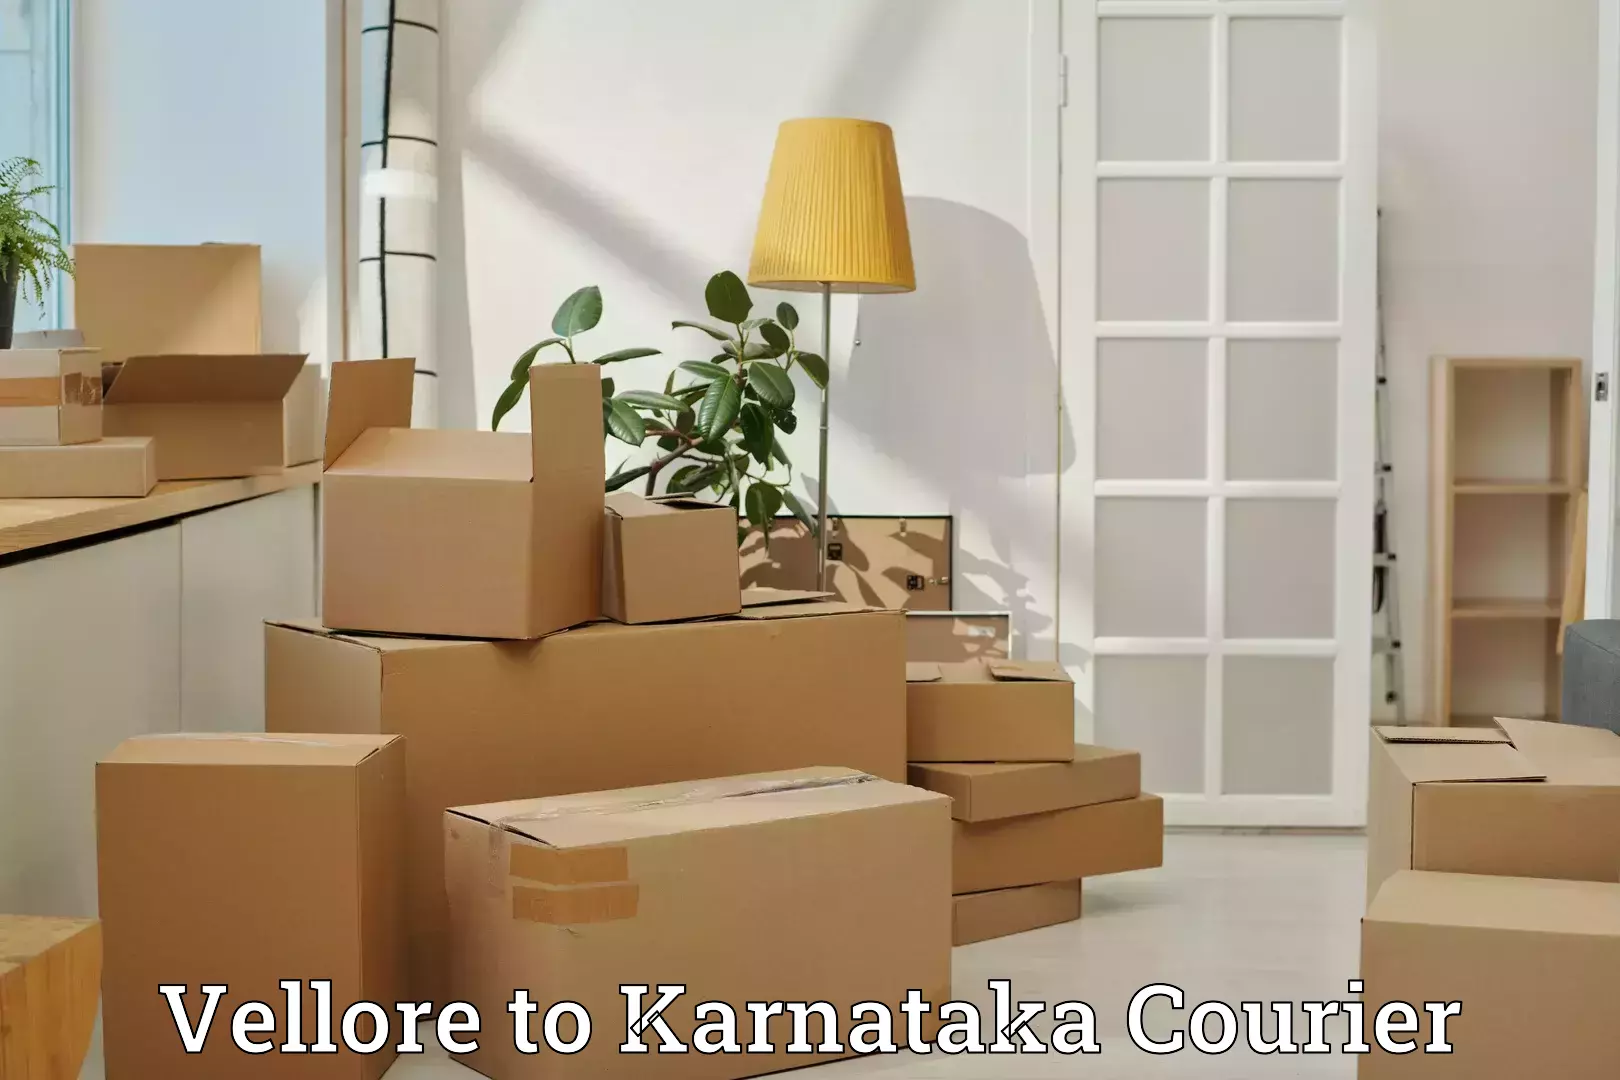 Luggage transport company Vellore to Manipal